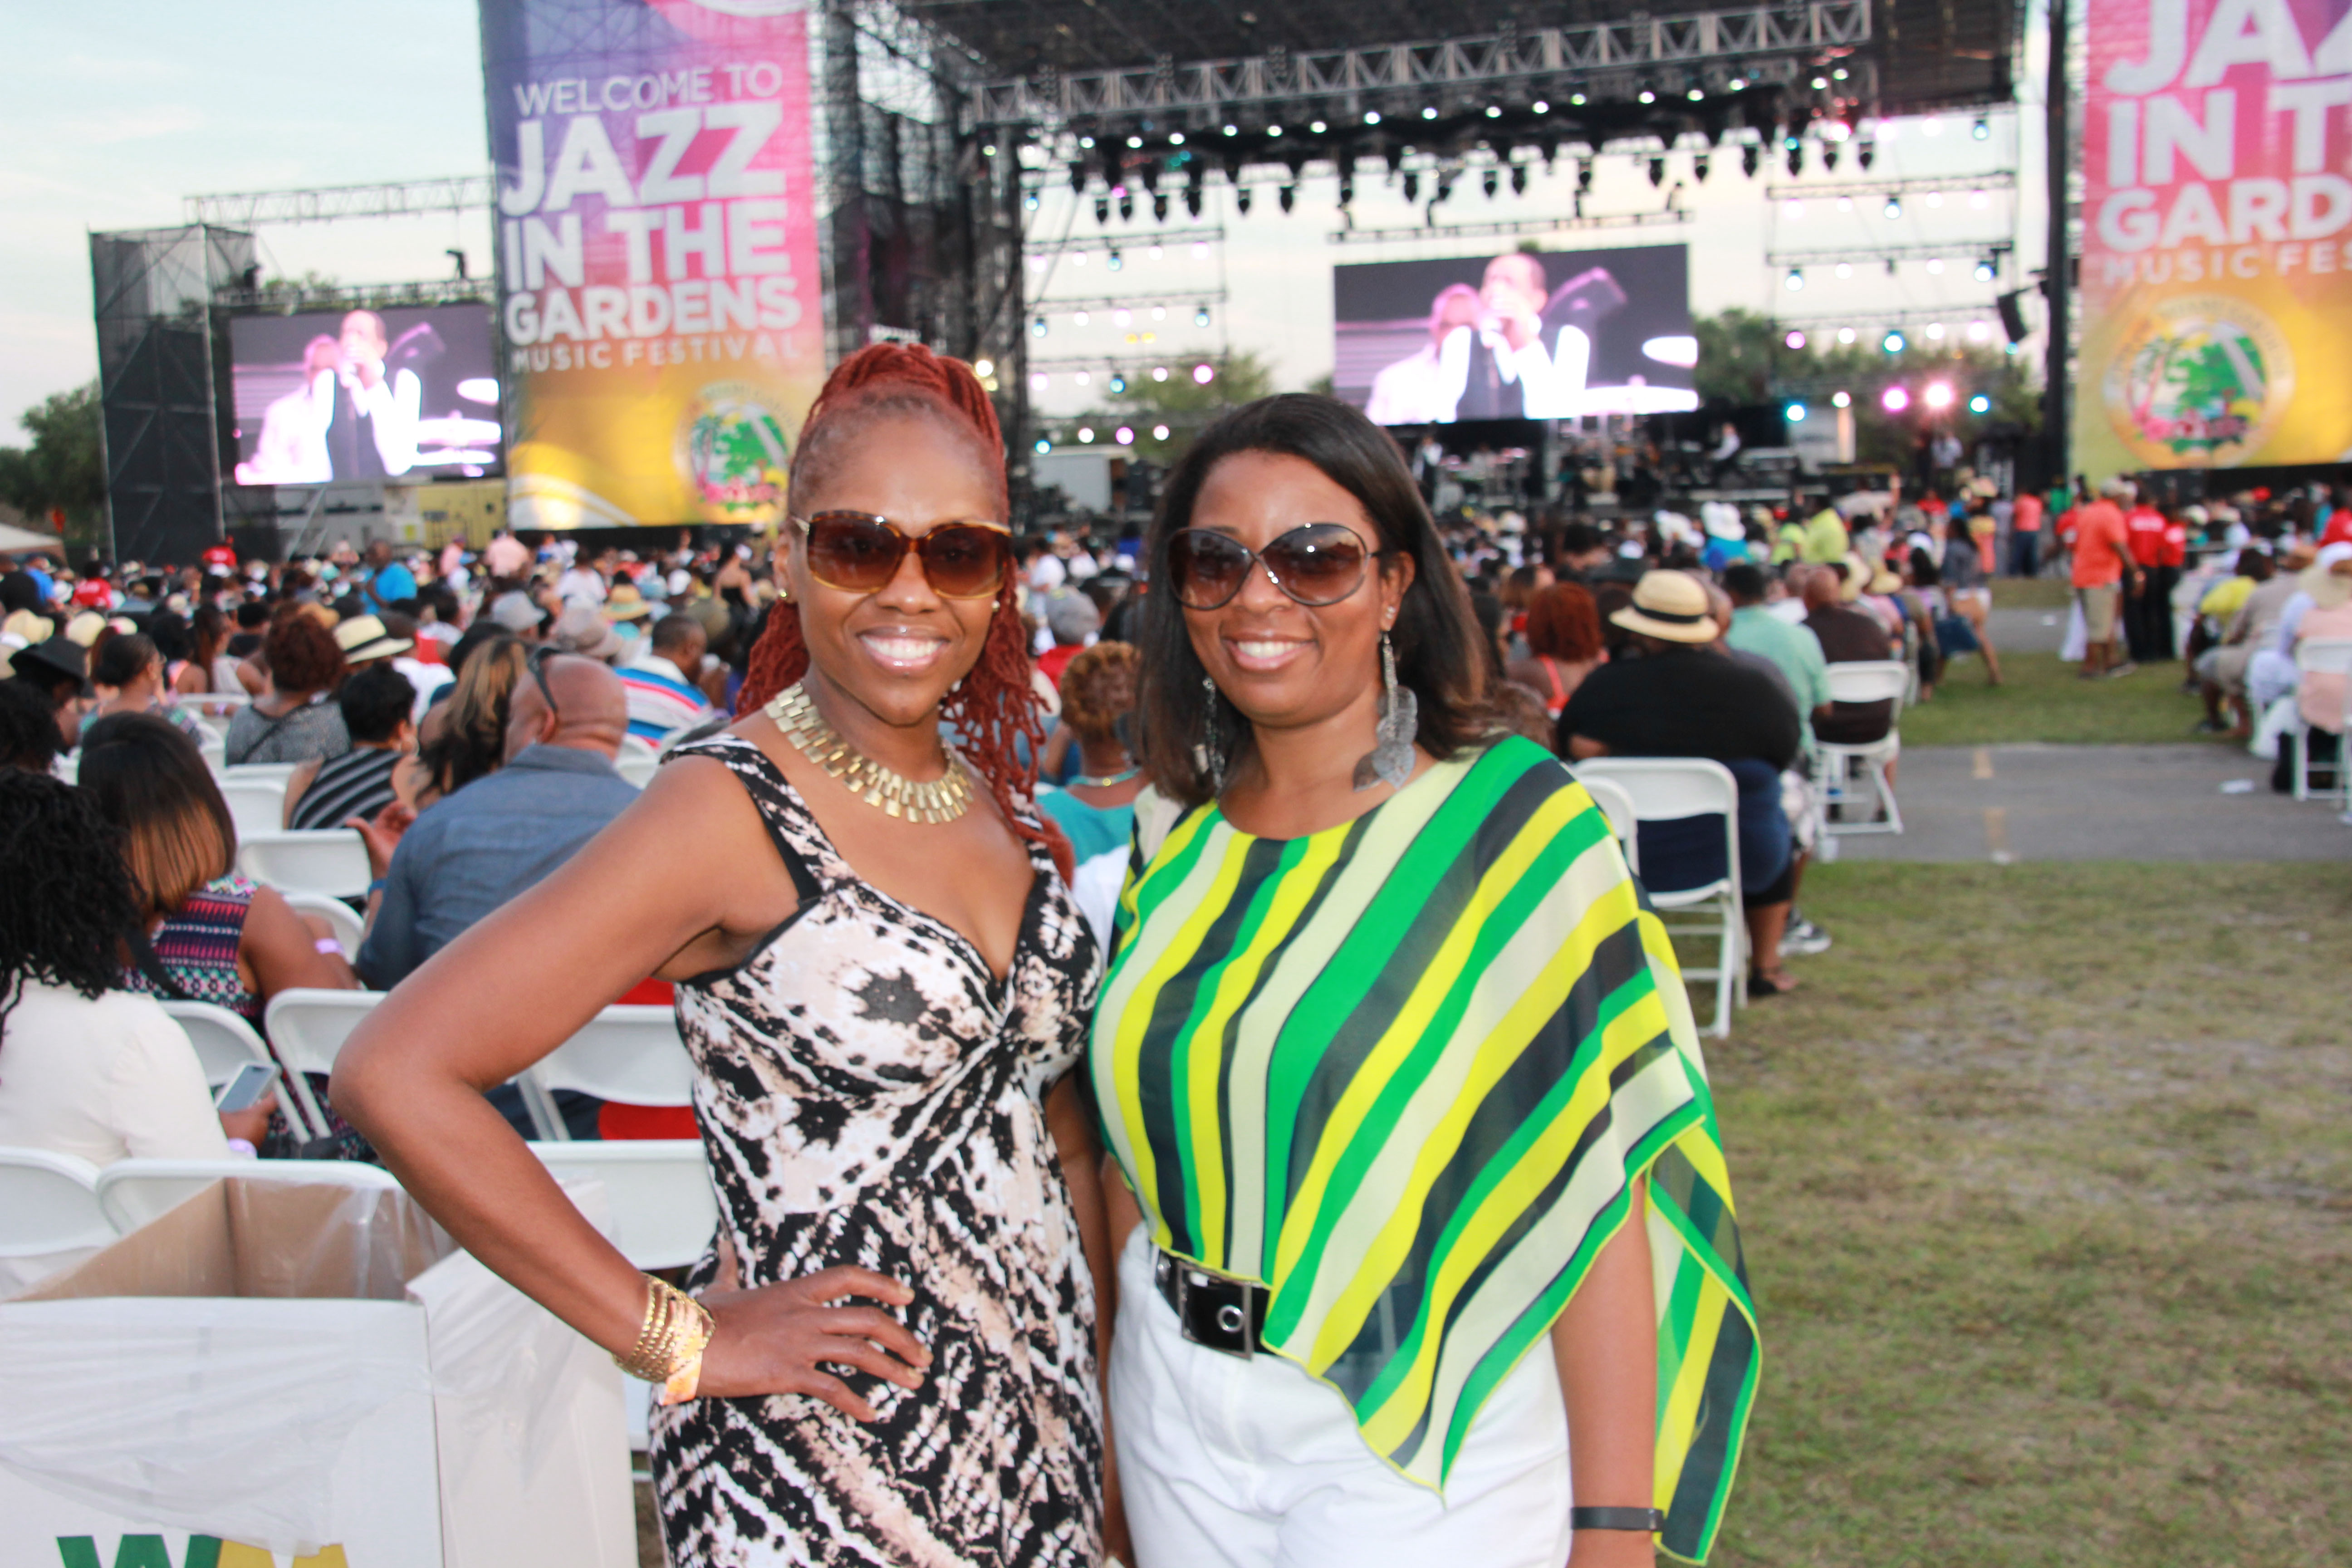 Hottest Fashions At Jazz In The Gardens 2015 Page 8 Of 12